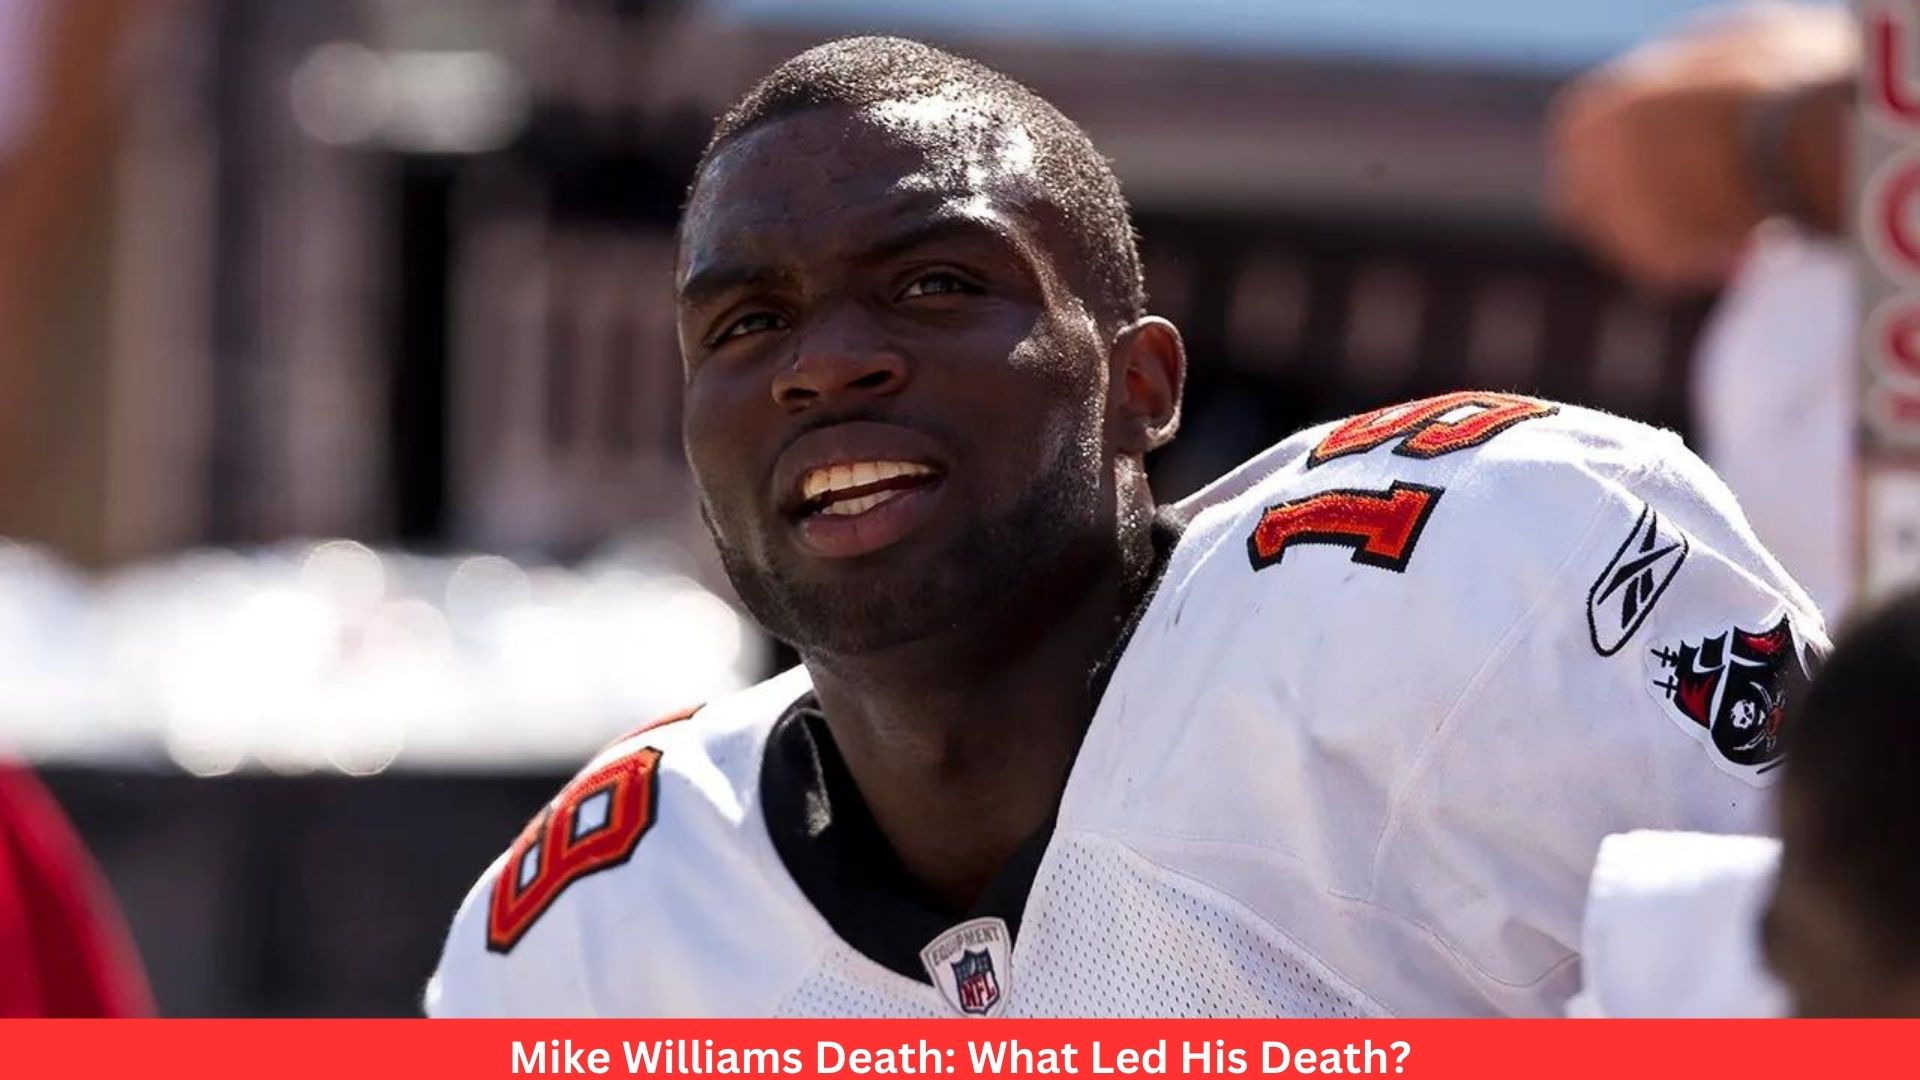 Mike Williams Death: What Led His Death?